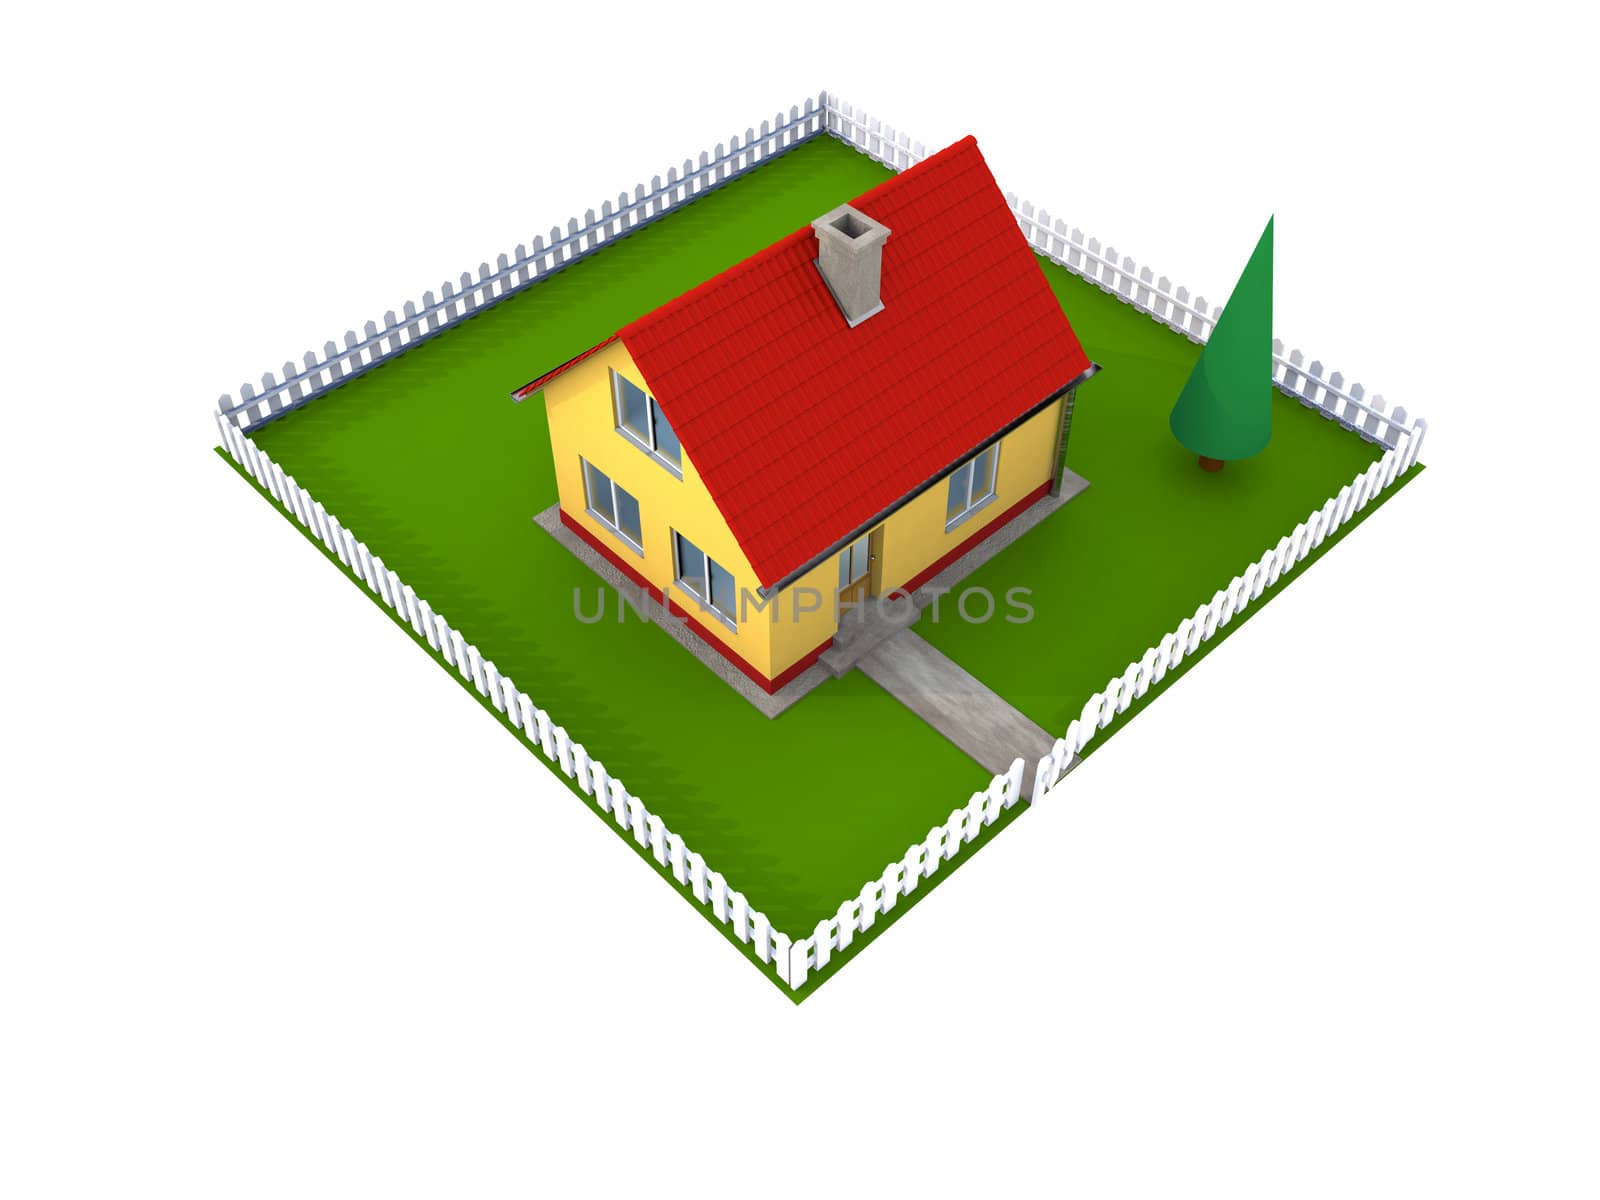 Small family house with red roof and green yard with white fence